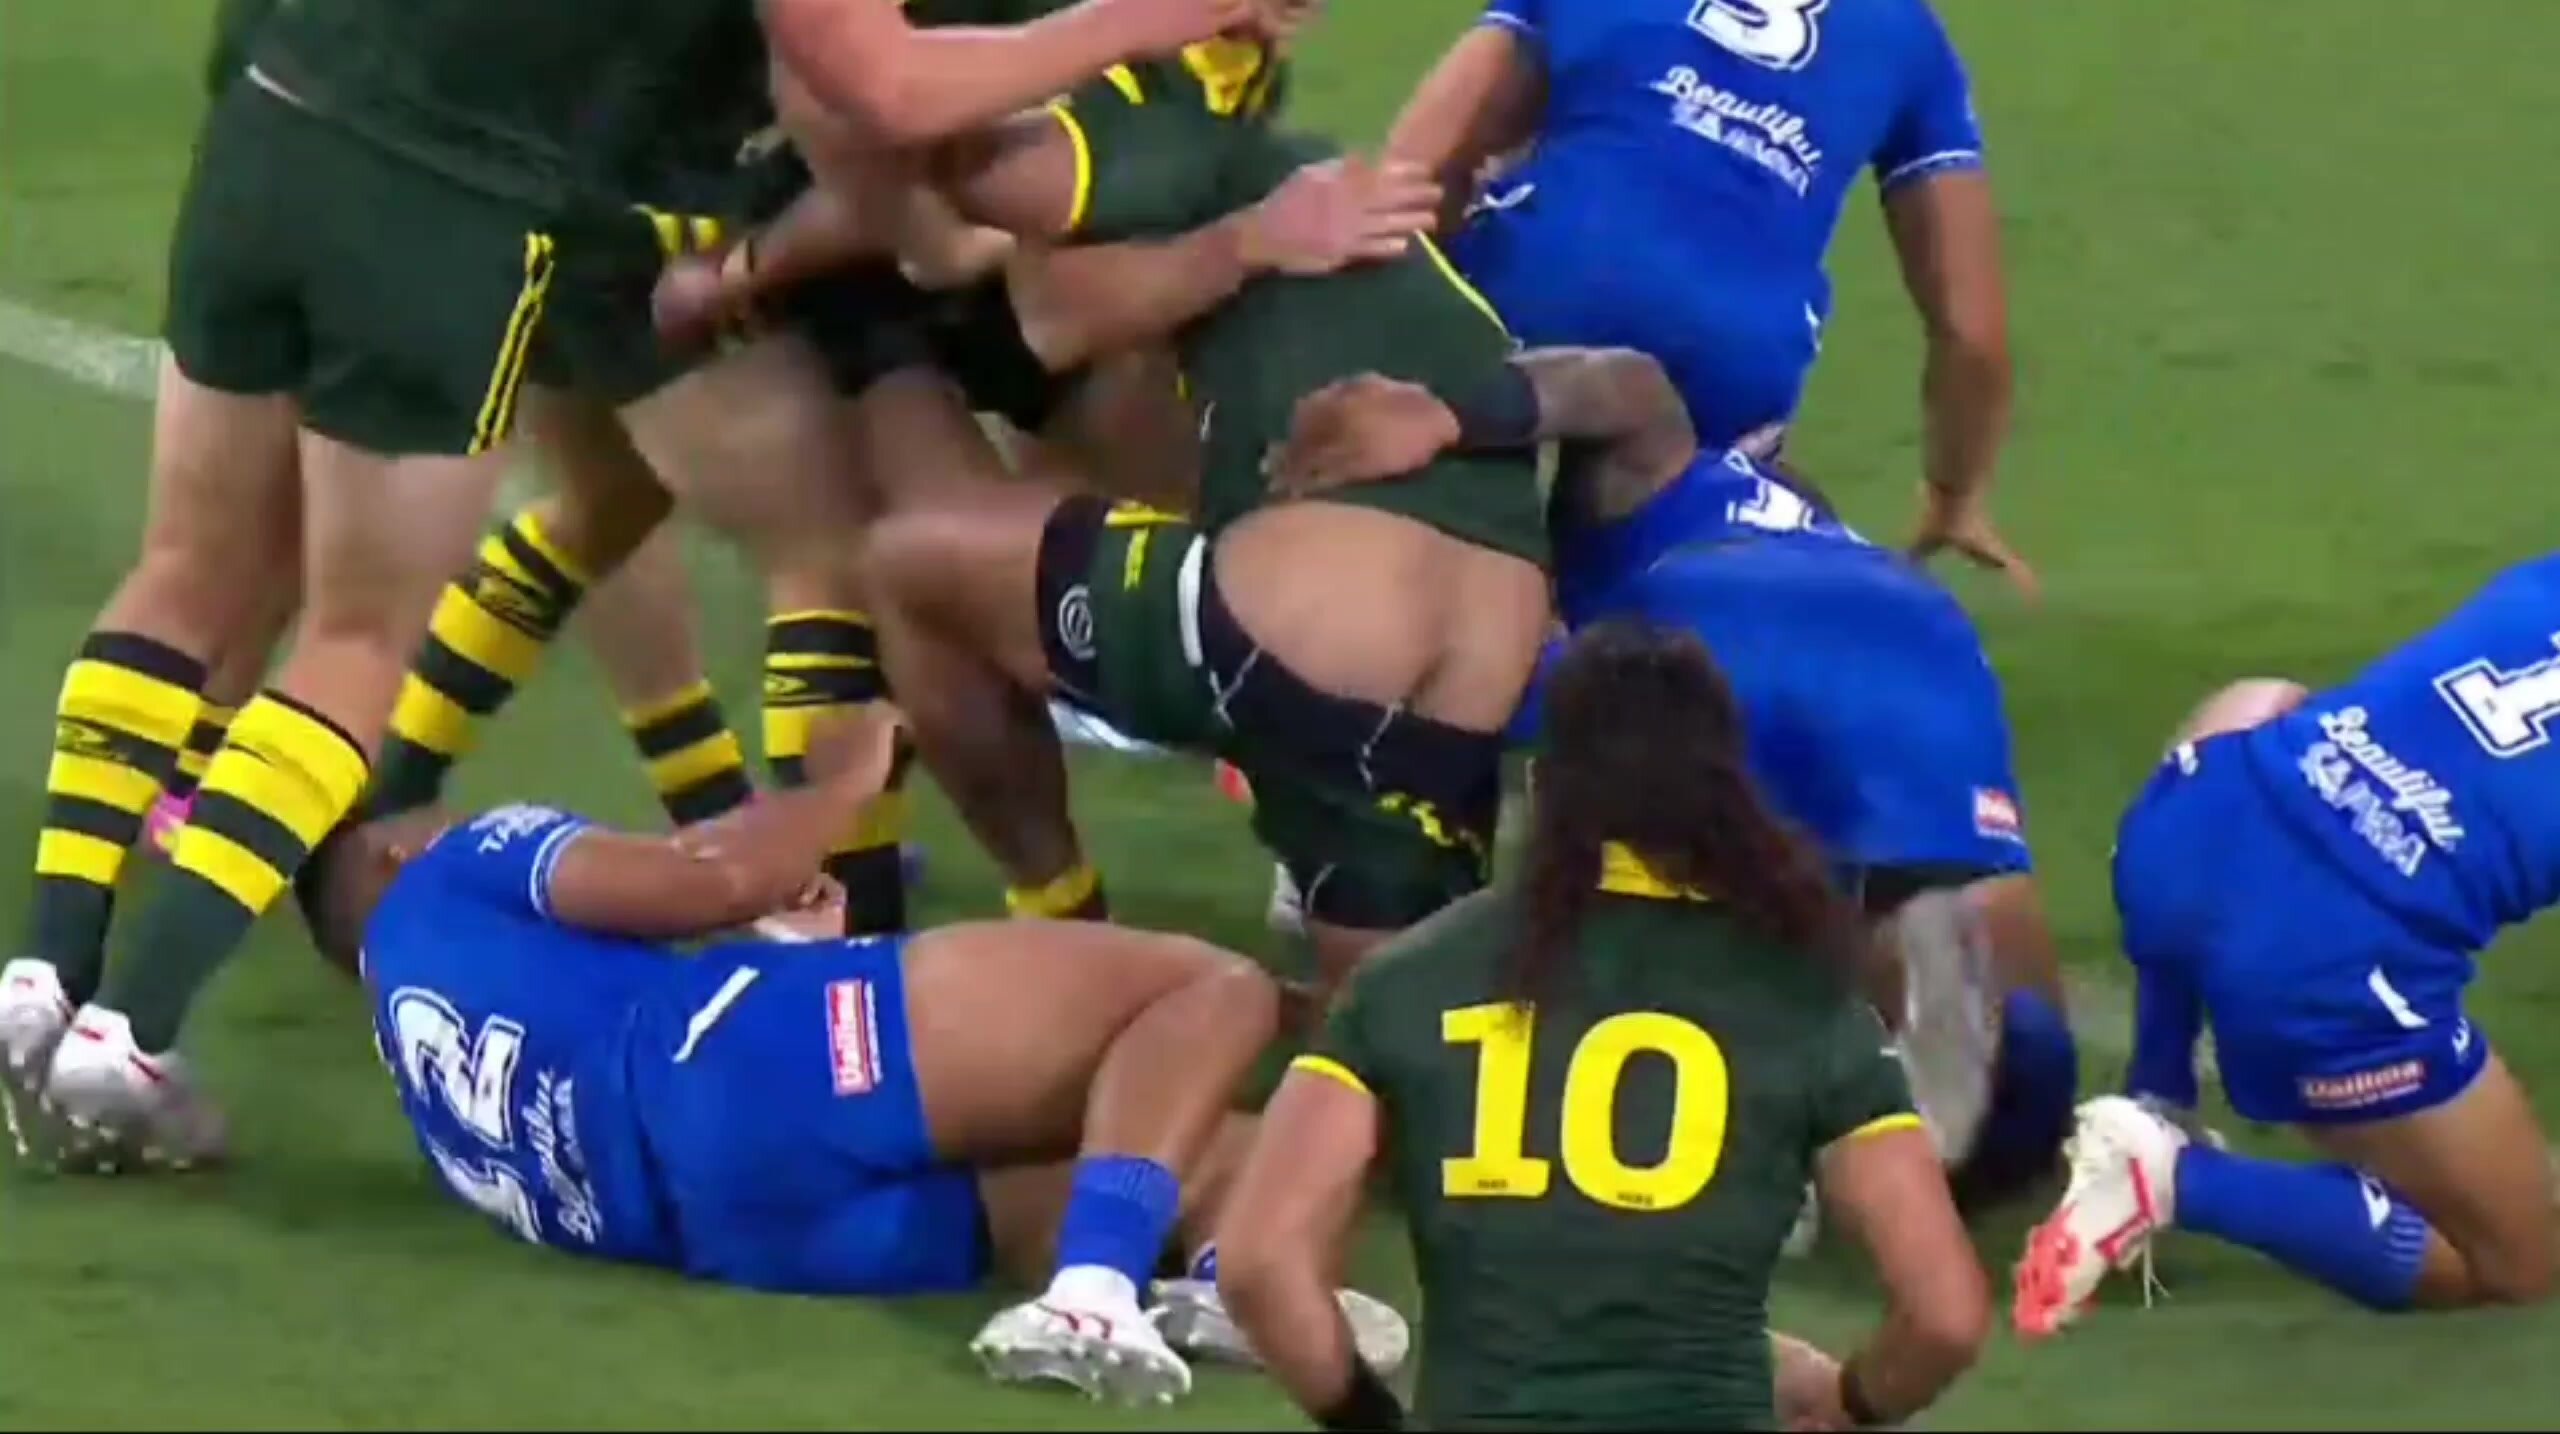 Hot Rugby Player's Big Ass Dacked